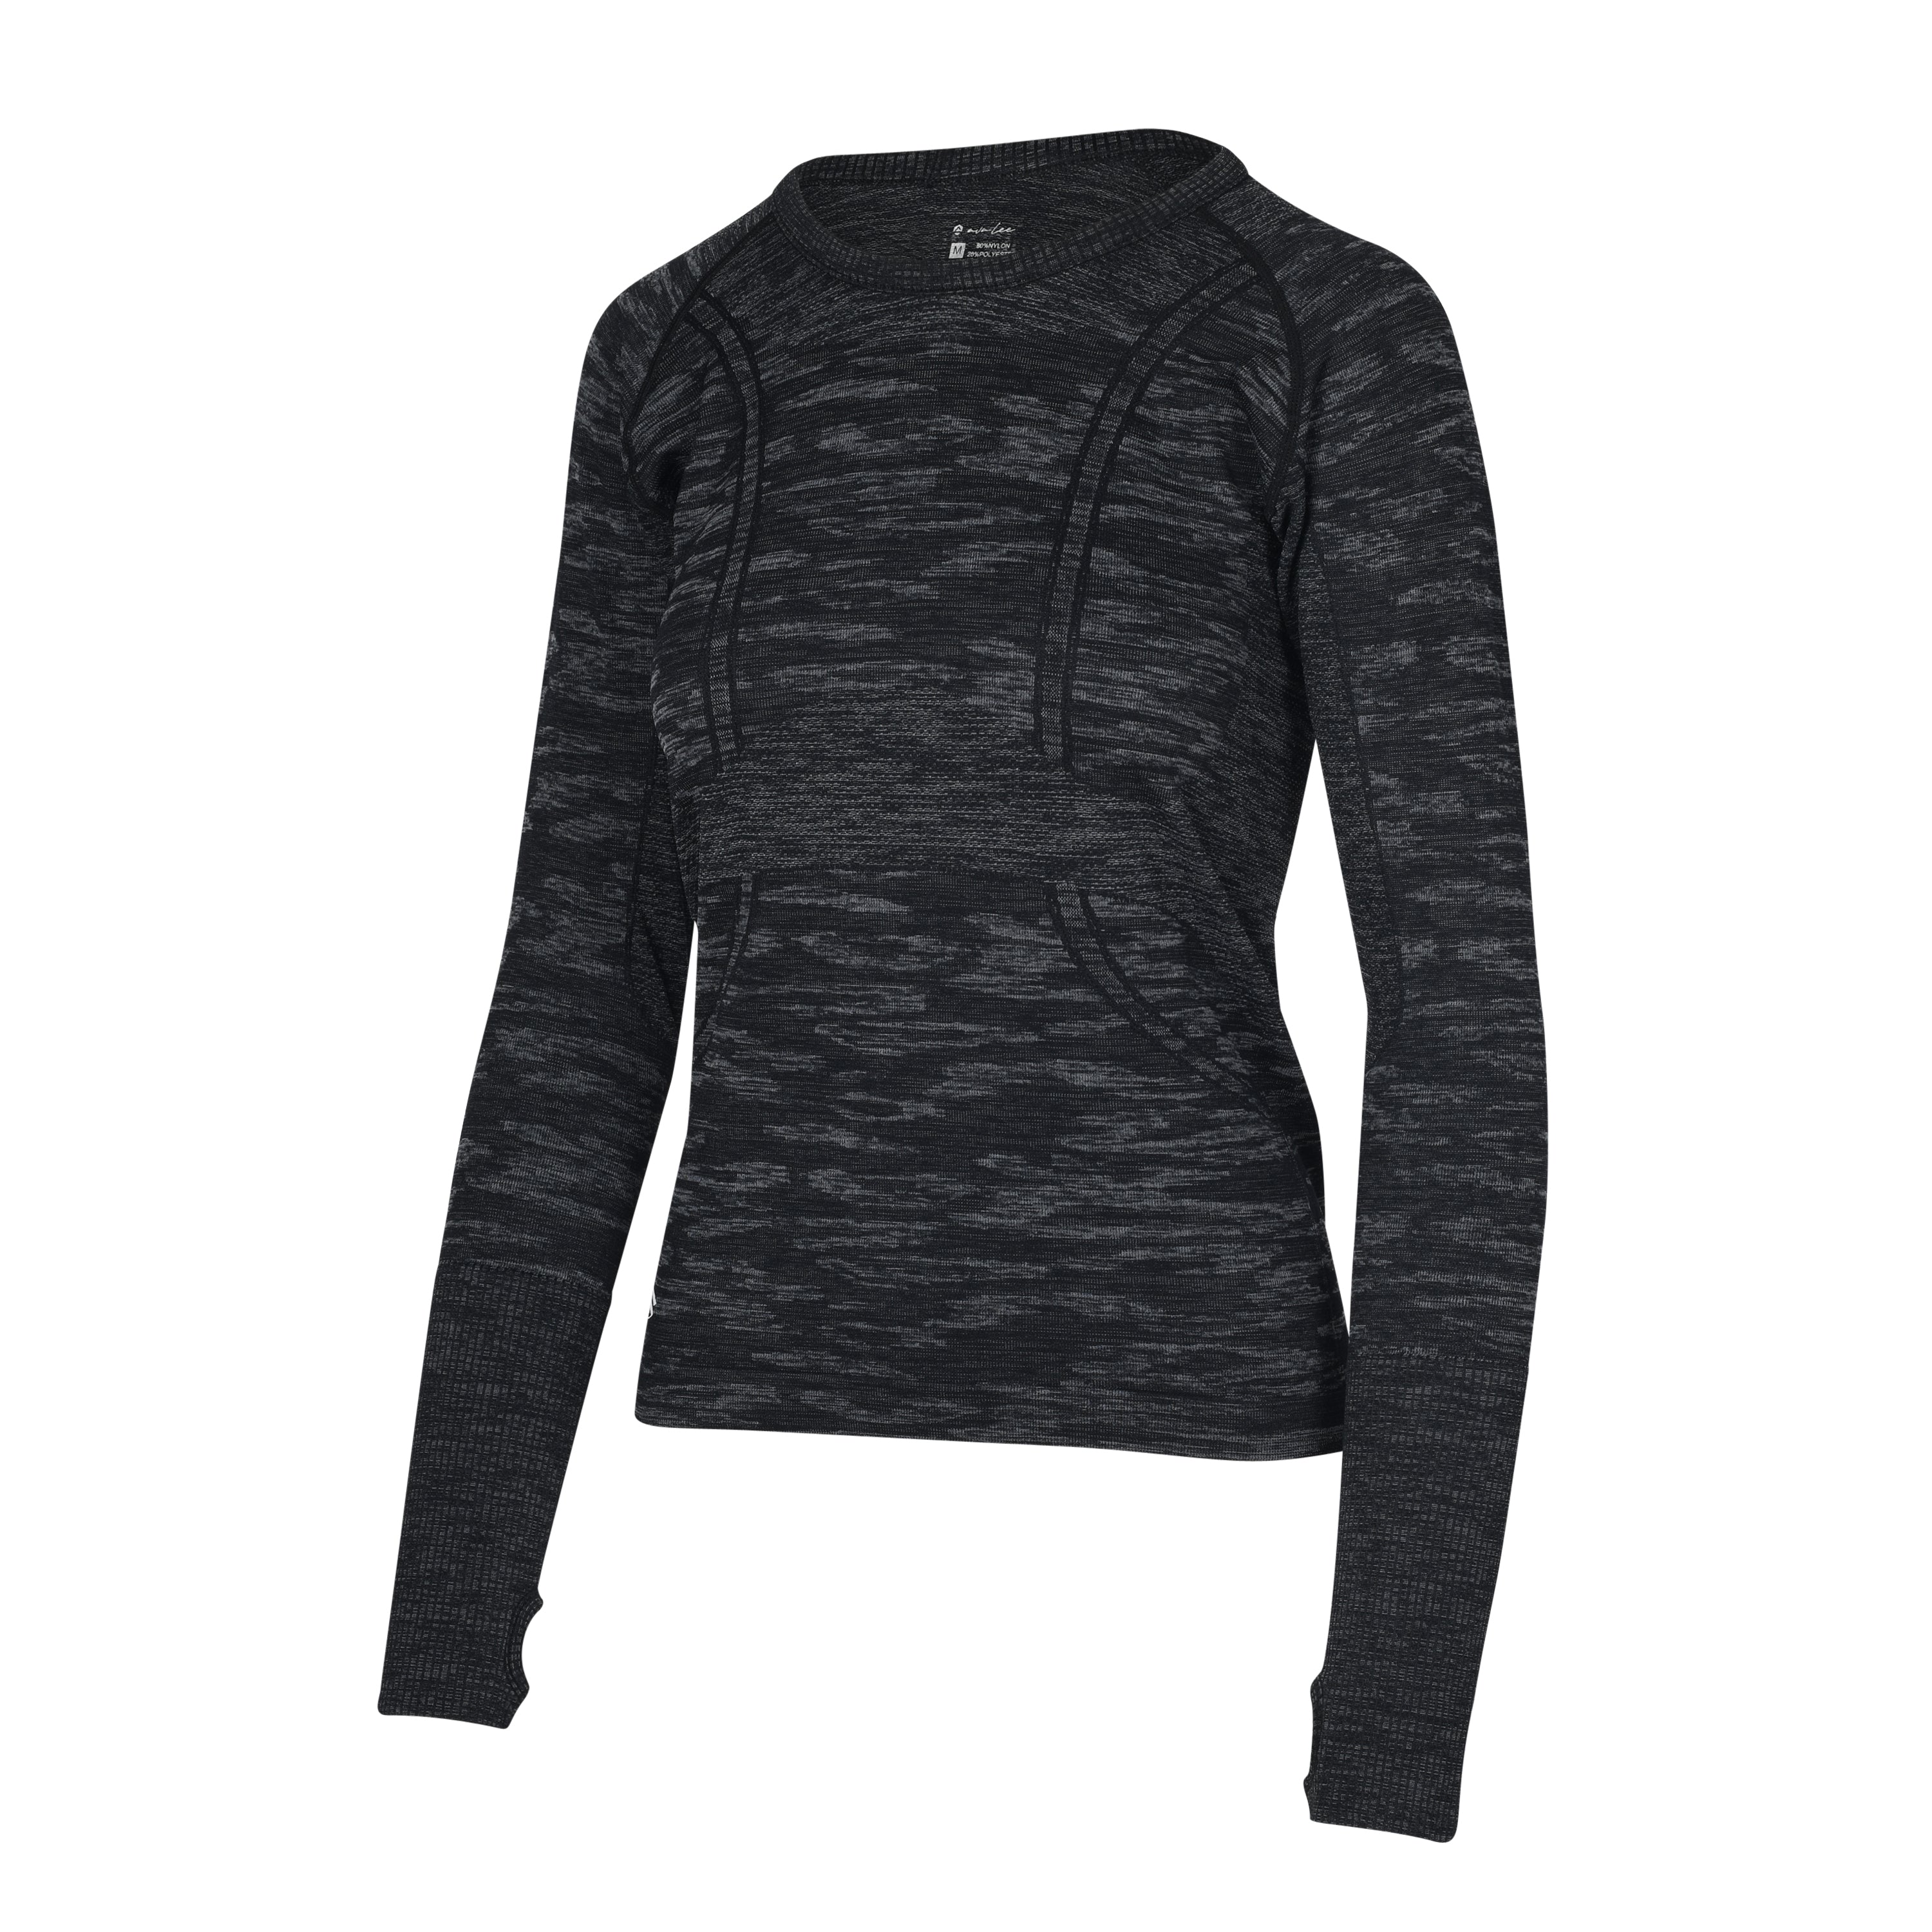 Charcoal Heather AvaLee by Selkirk Women's Fitted Longsleeve